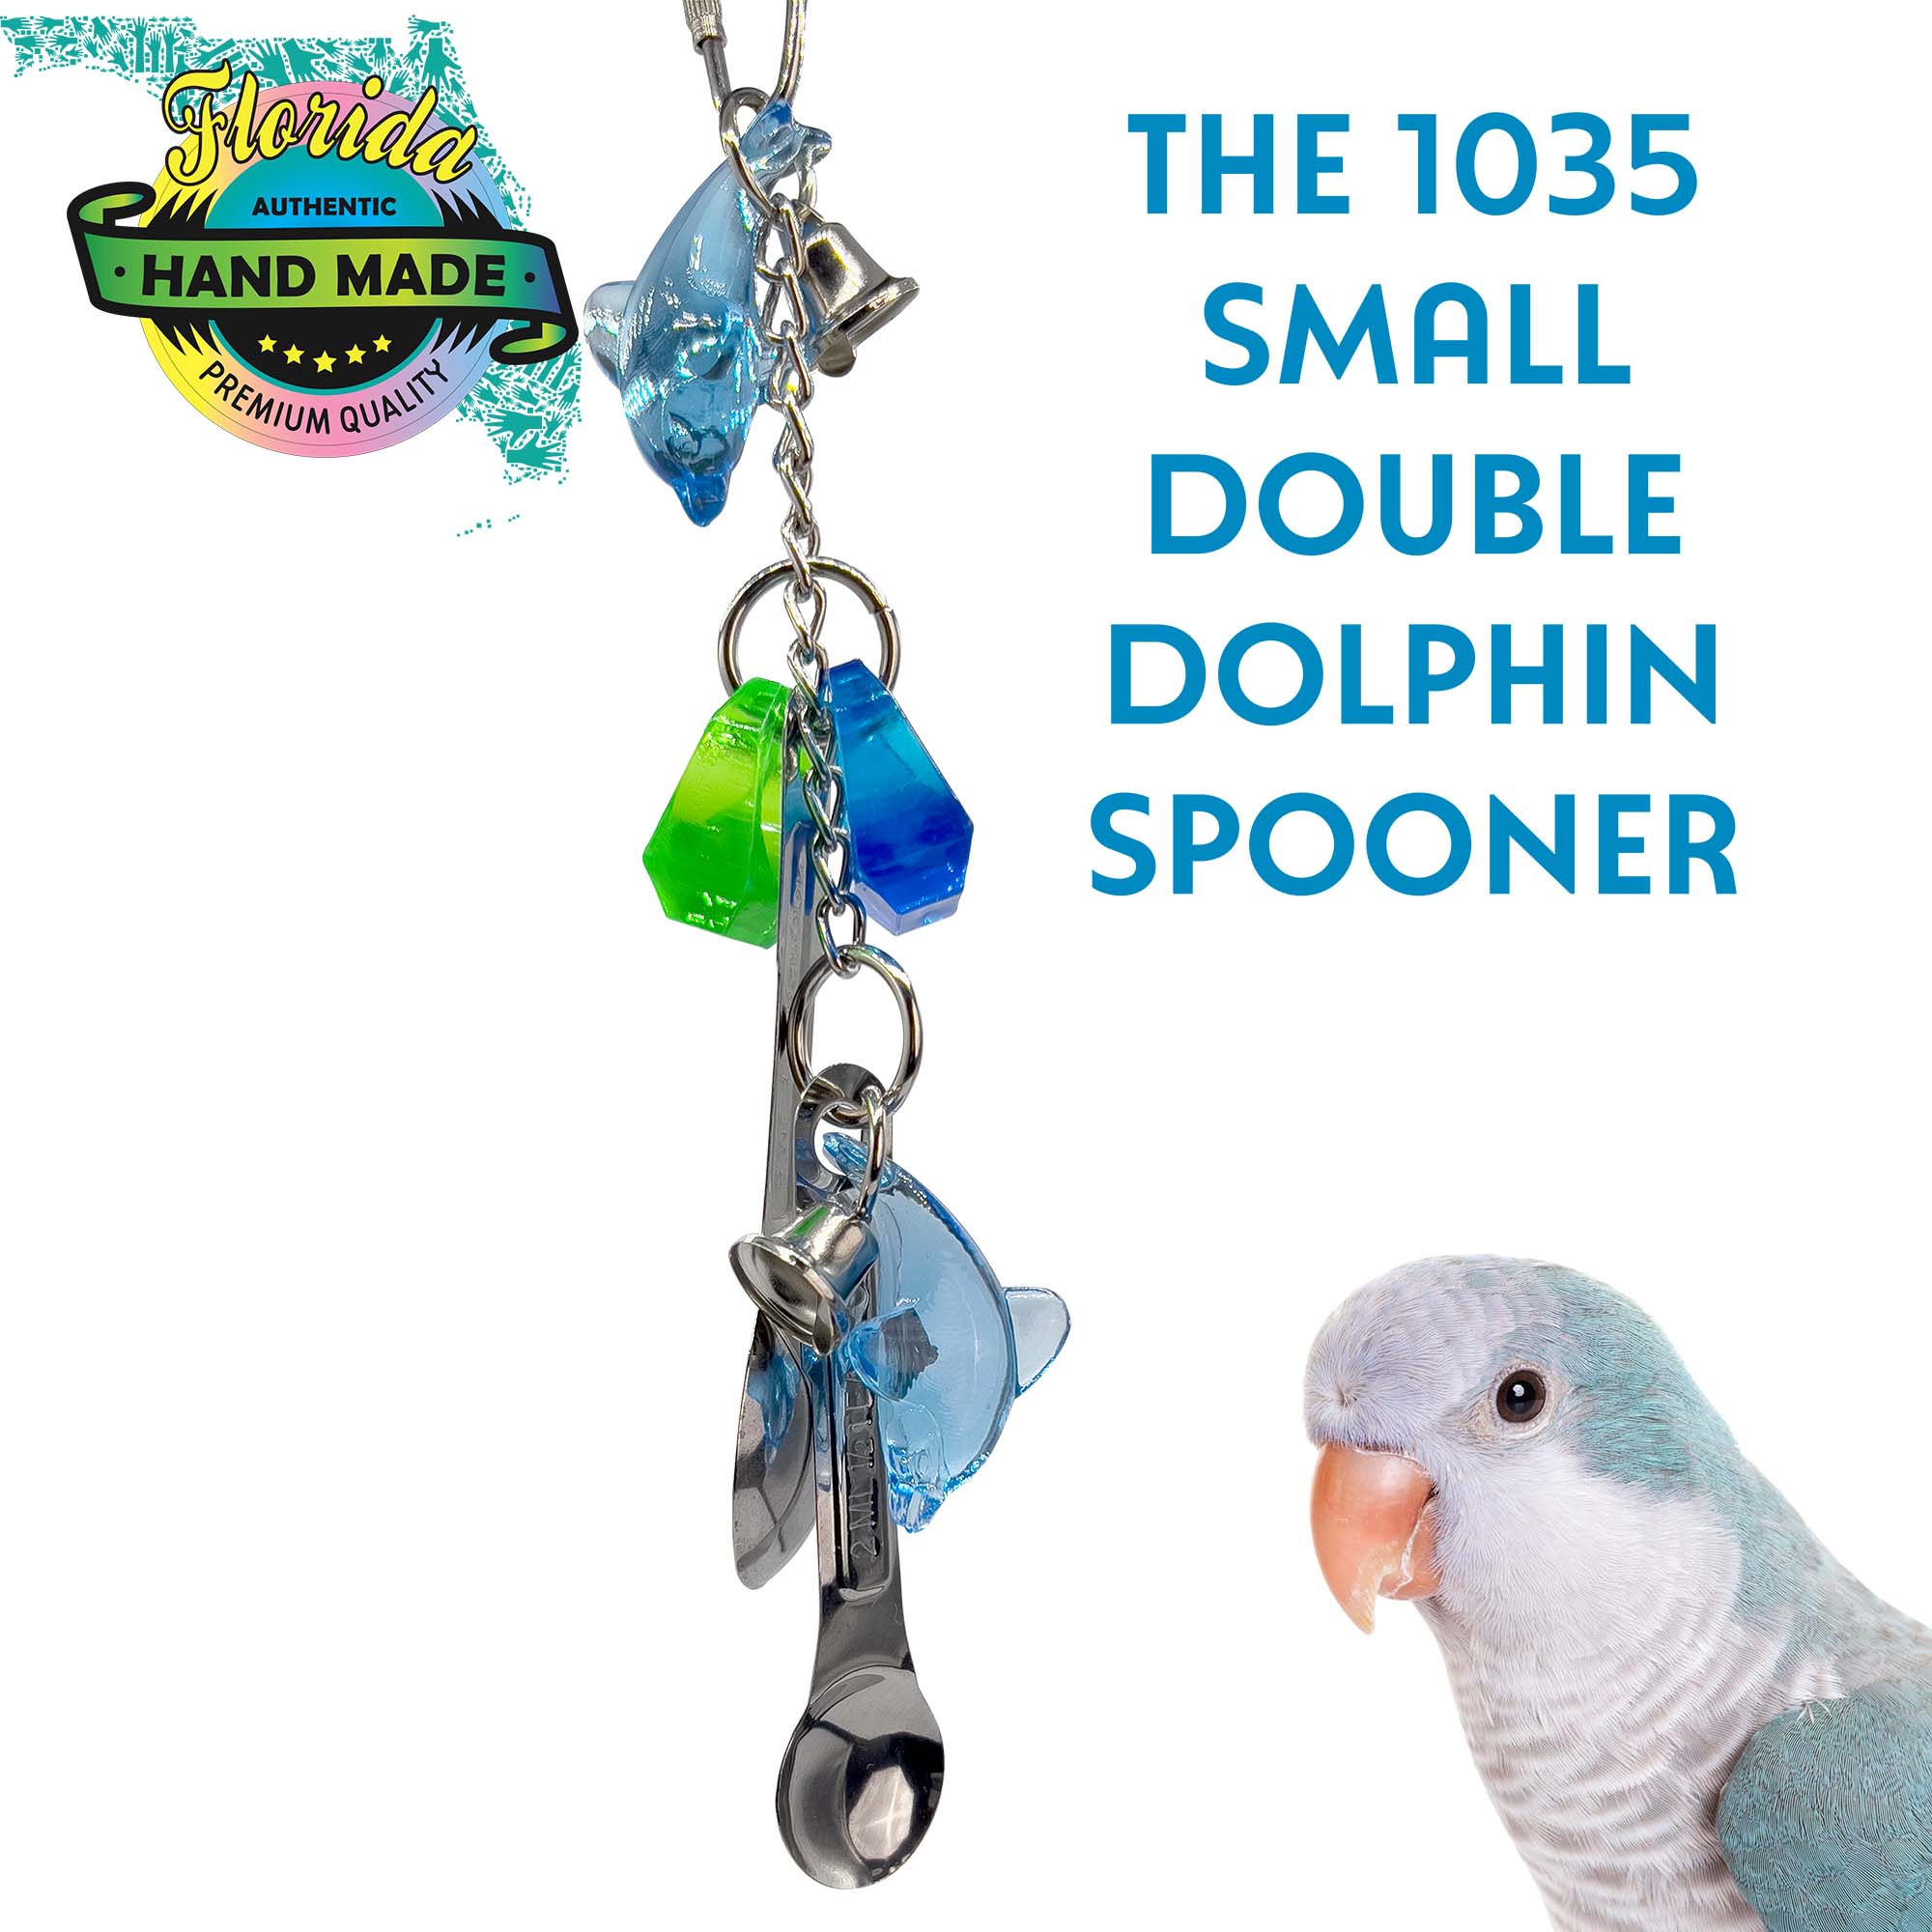 1035 Small Double Dolphin Spooner